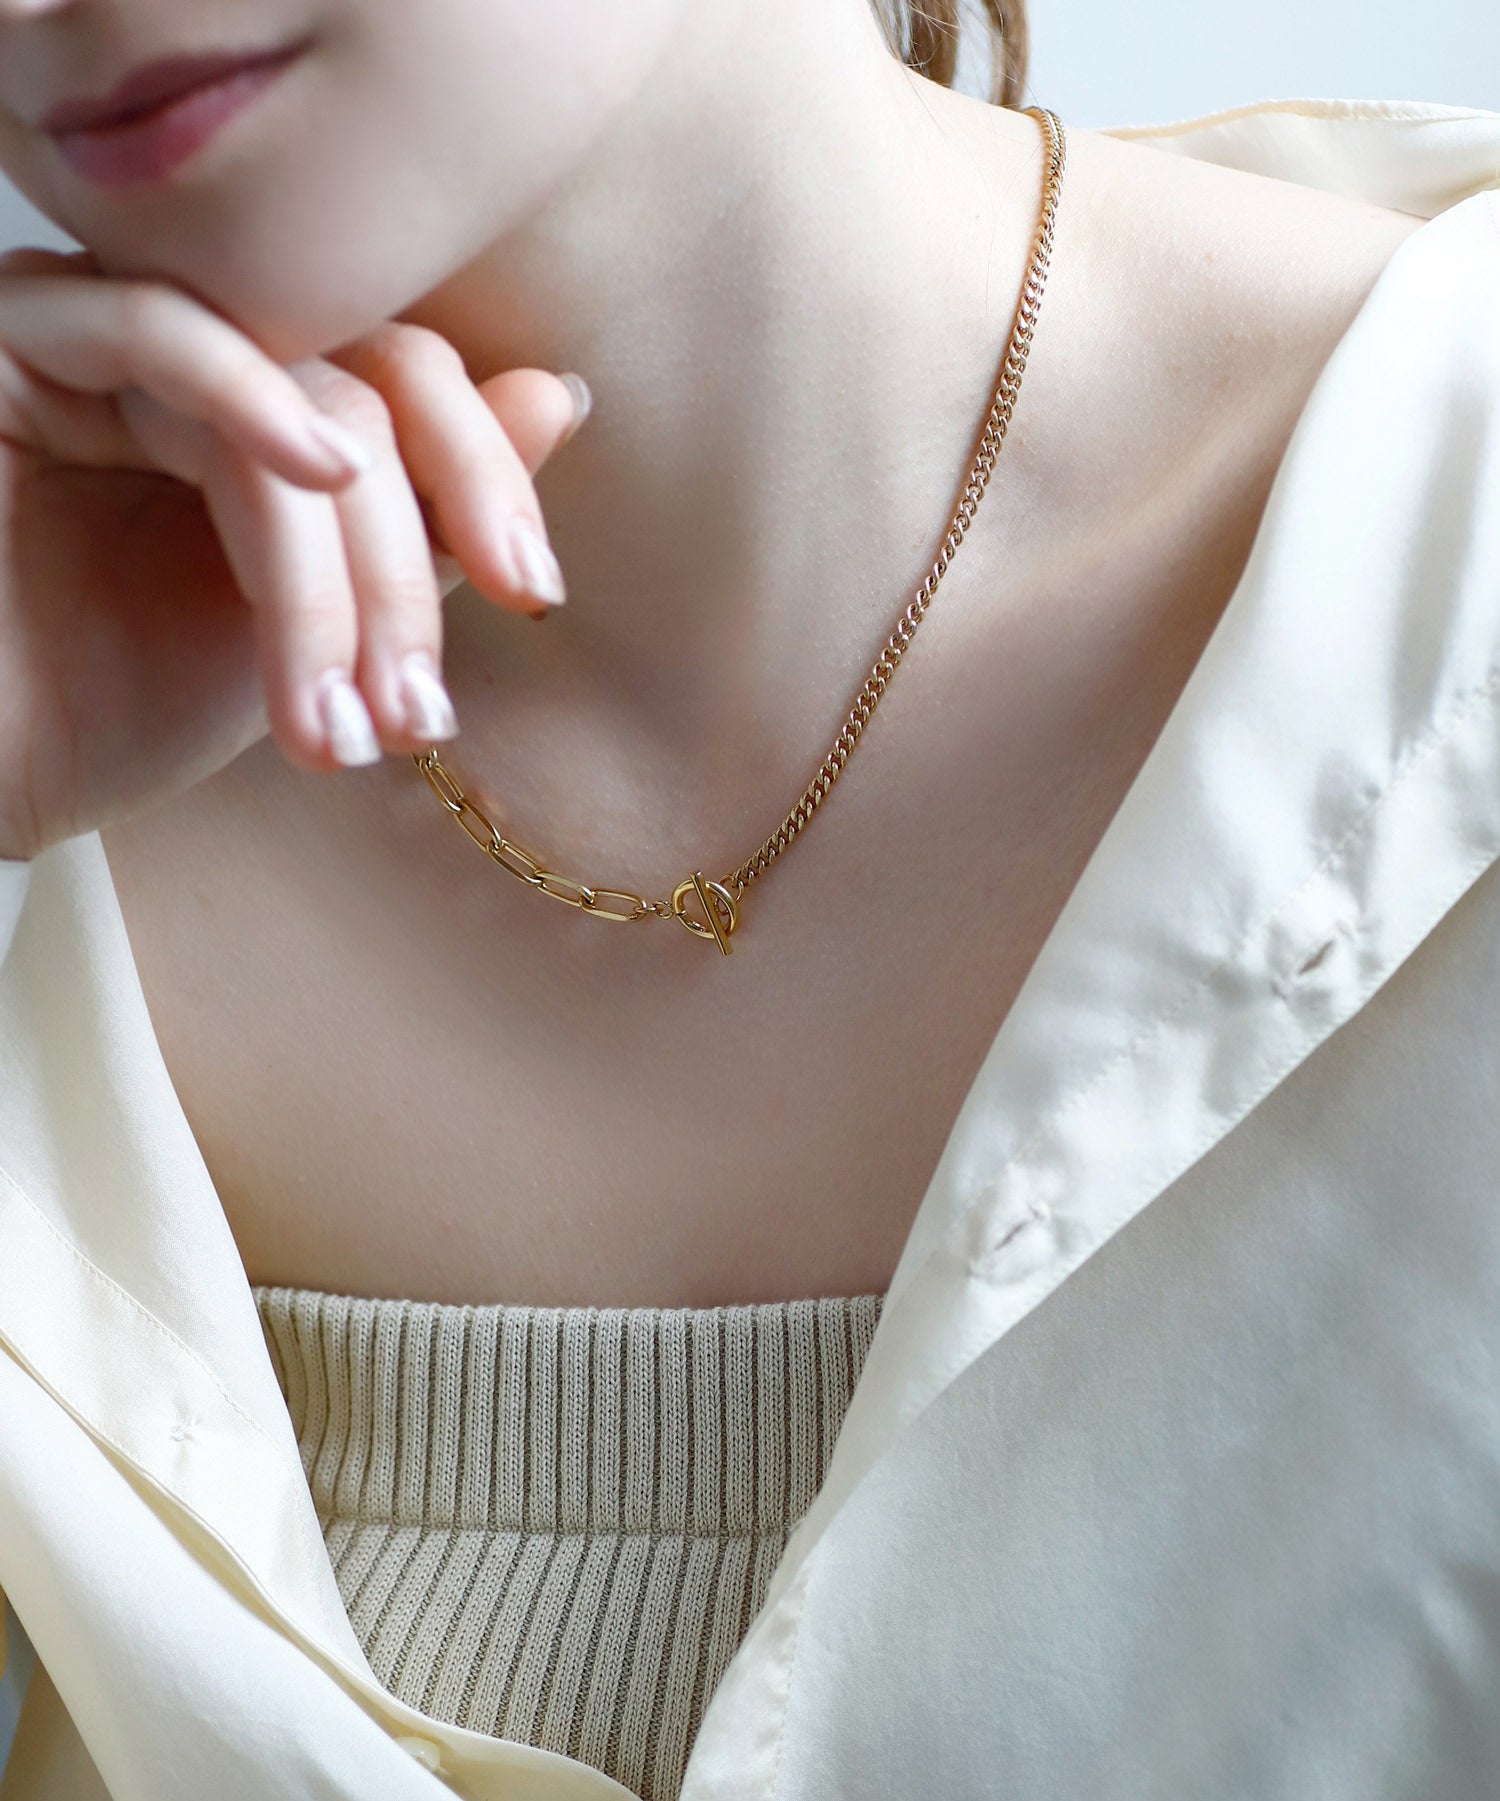 A spectacular shiny gold chain with a sparkling diamond “Capricious Cr –  買えるLEON